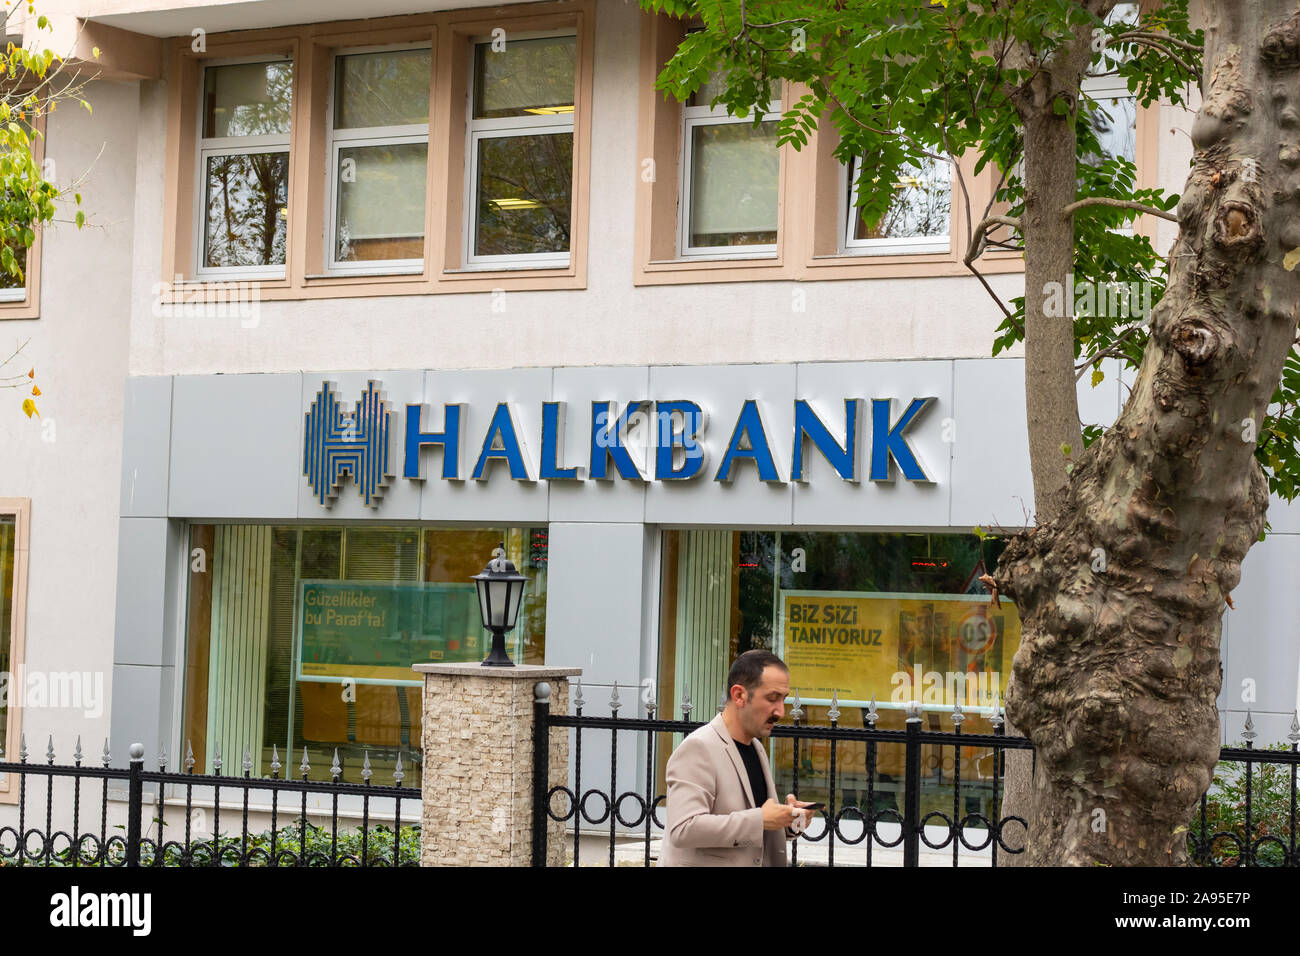 Istanbul, Turkey - November-10.2019: Halkbank is a state-owned bank. Photo of the exterior view of the minister located in Levent. Between the trees. Stock Photo